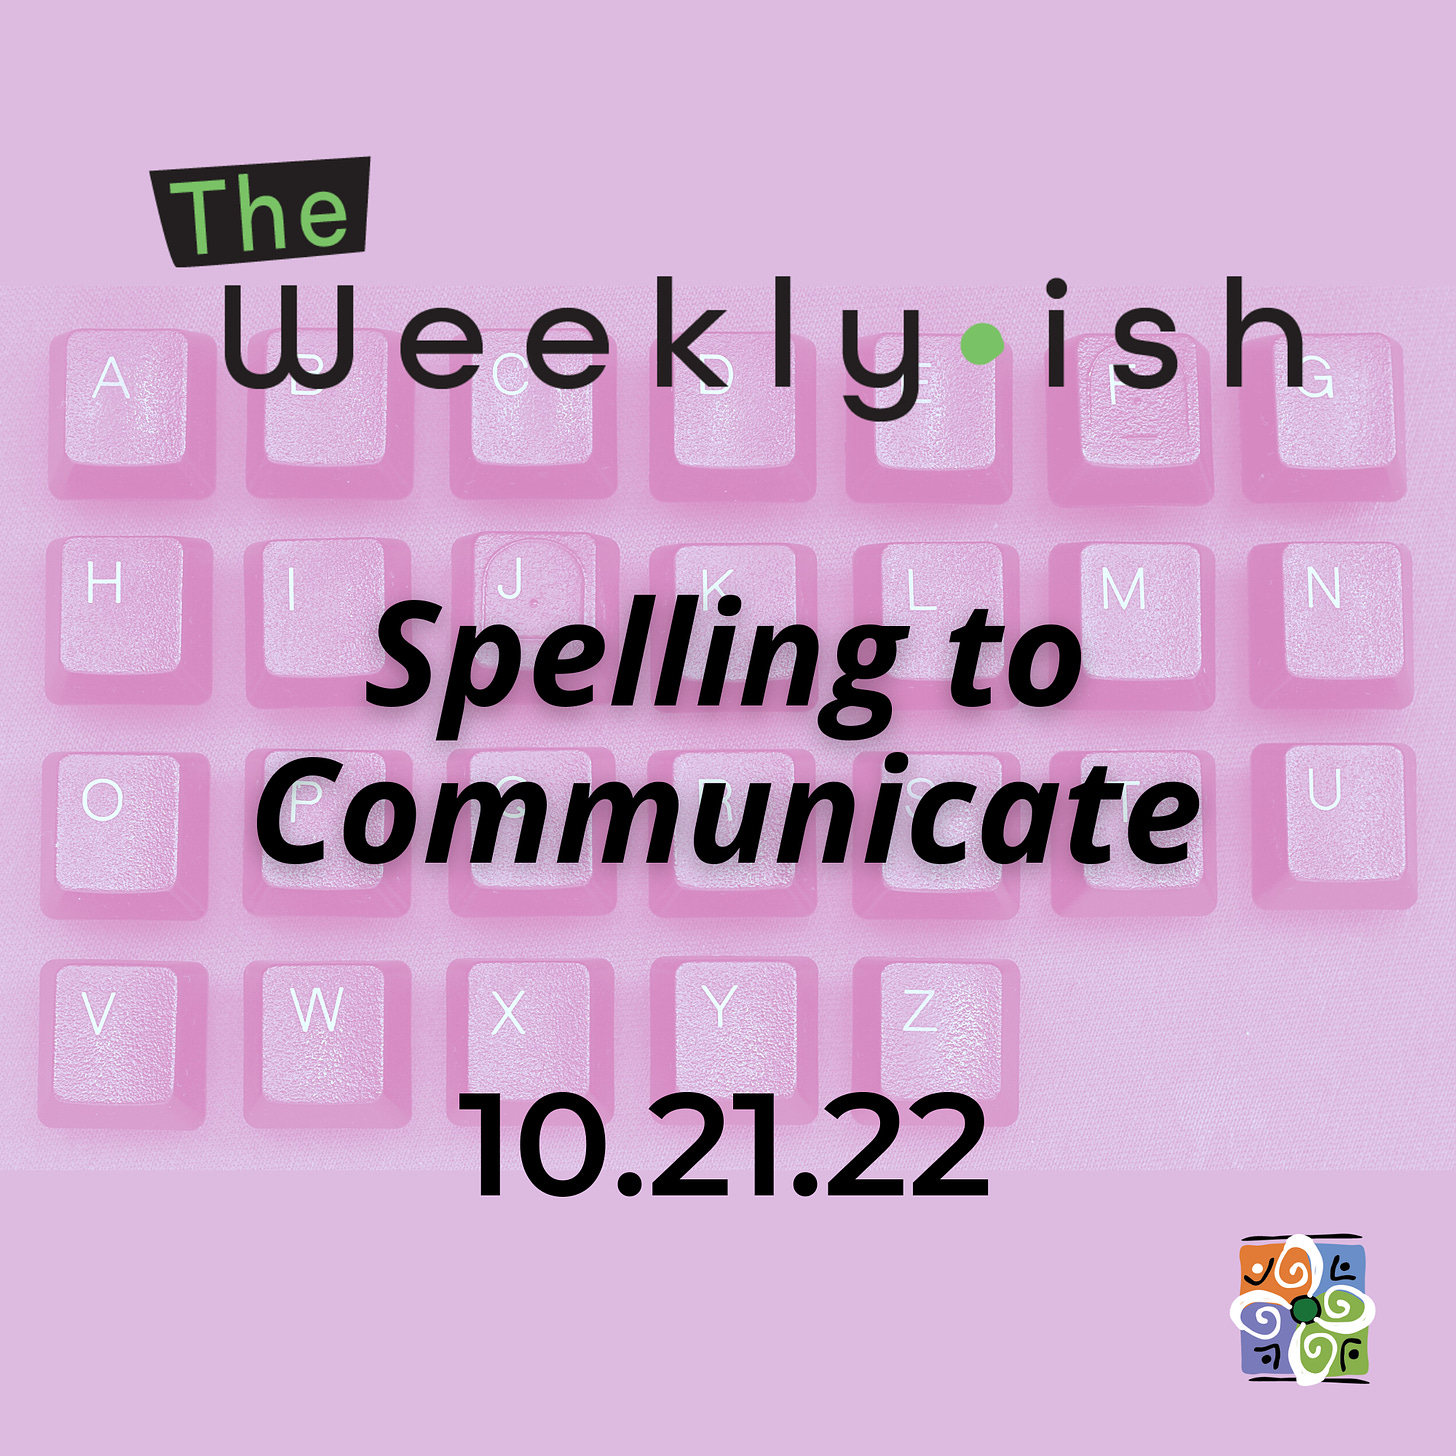 The Weeklyish Cover Art: pink-tinted background; keyboard letters from A-Z listed in alphabetical order; text reads: The Weeklyish, Spelling to Communicate; 10.21.22 with MCIE logo in the bottom right corner